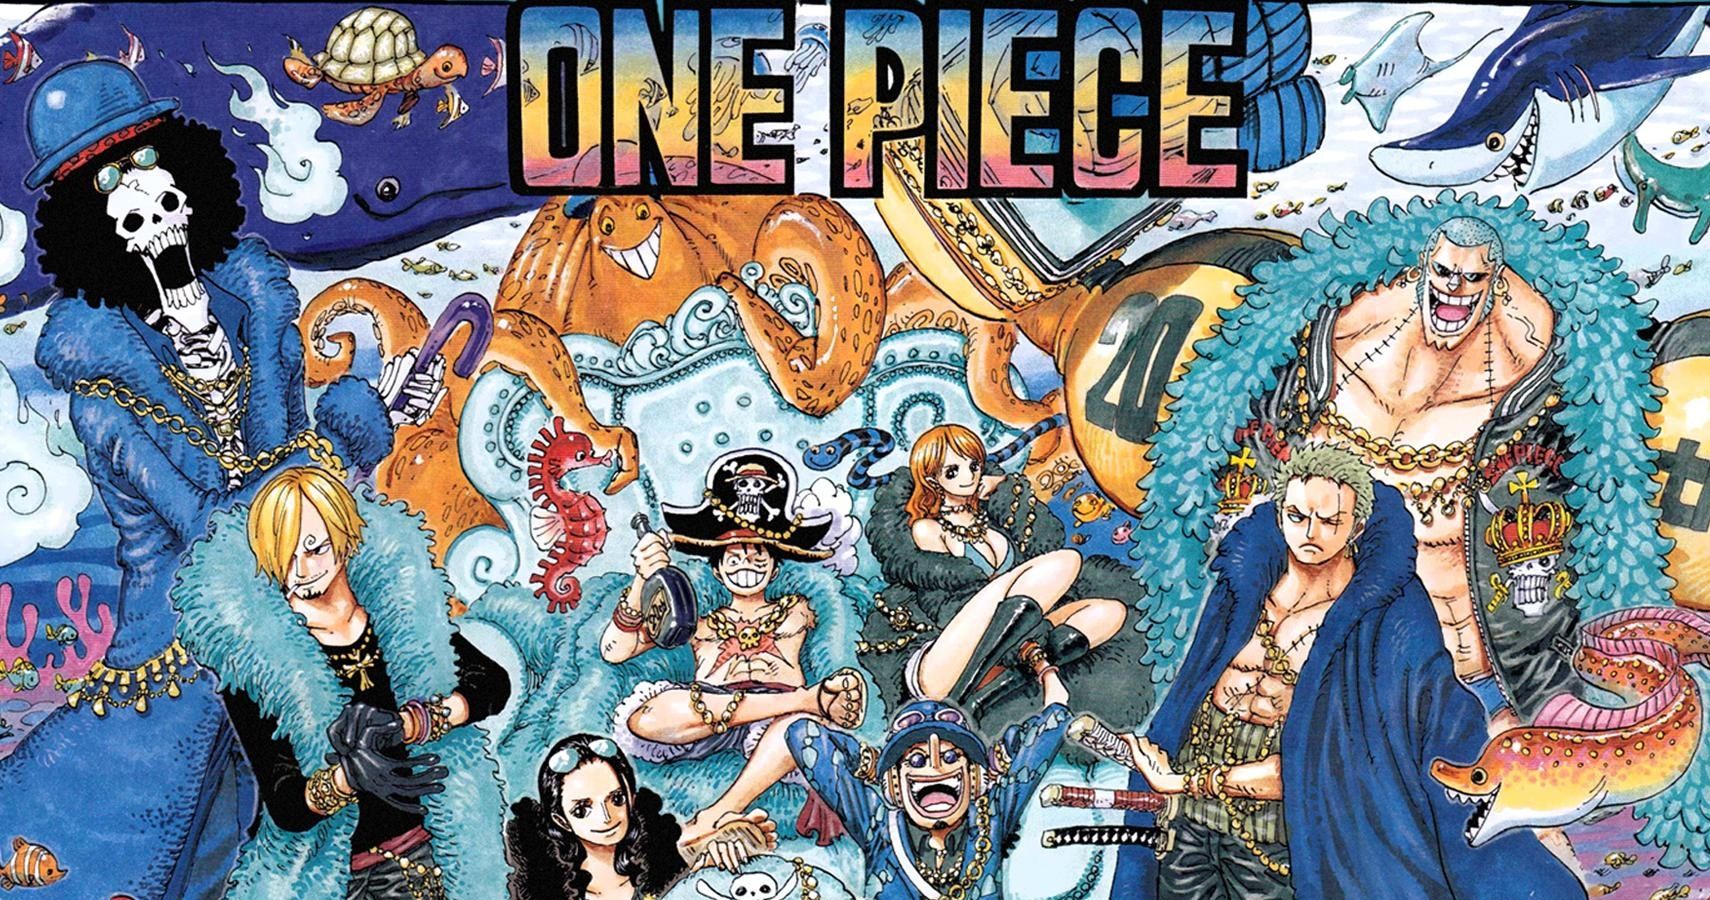 ONE PACE: Enjoying ONE PIECE anime without padding or filler